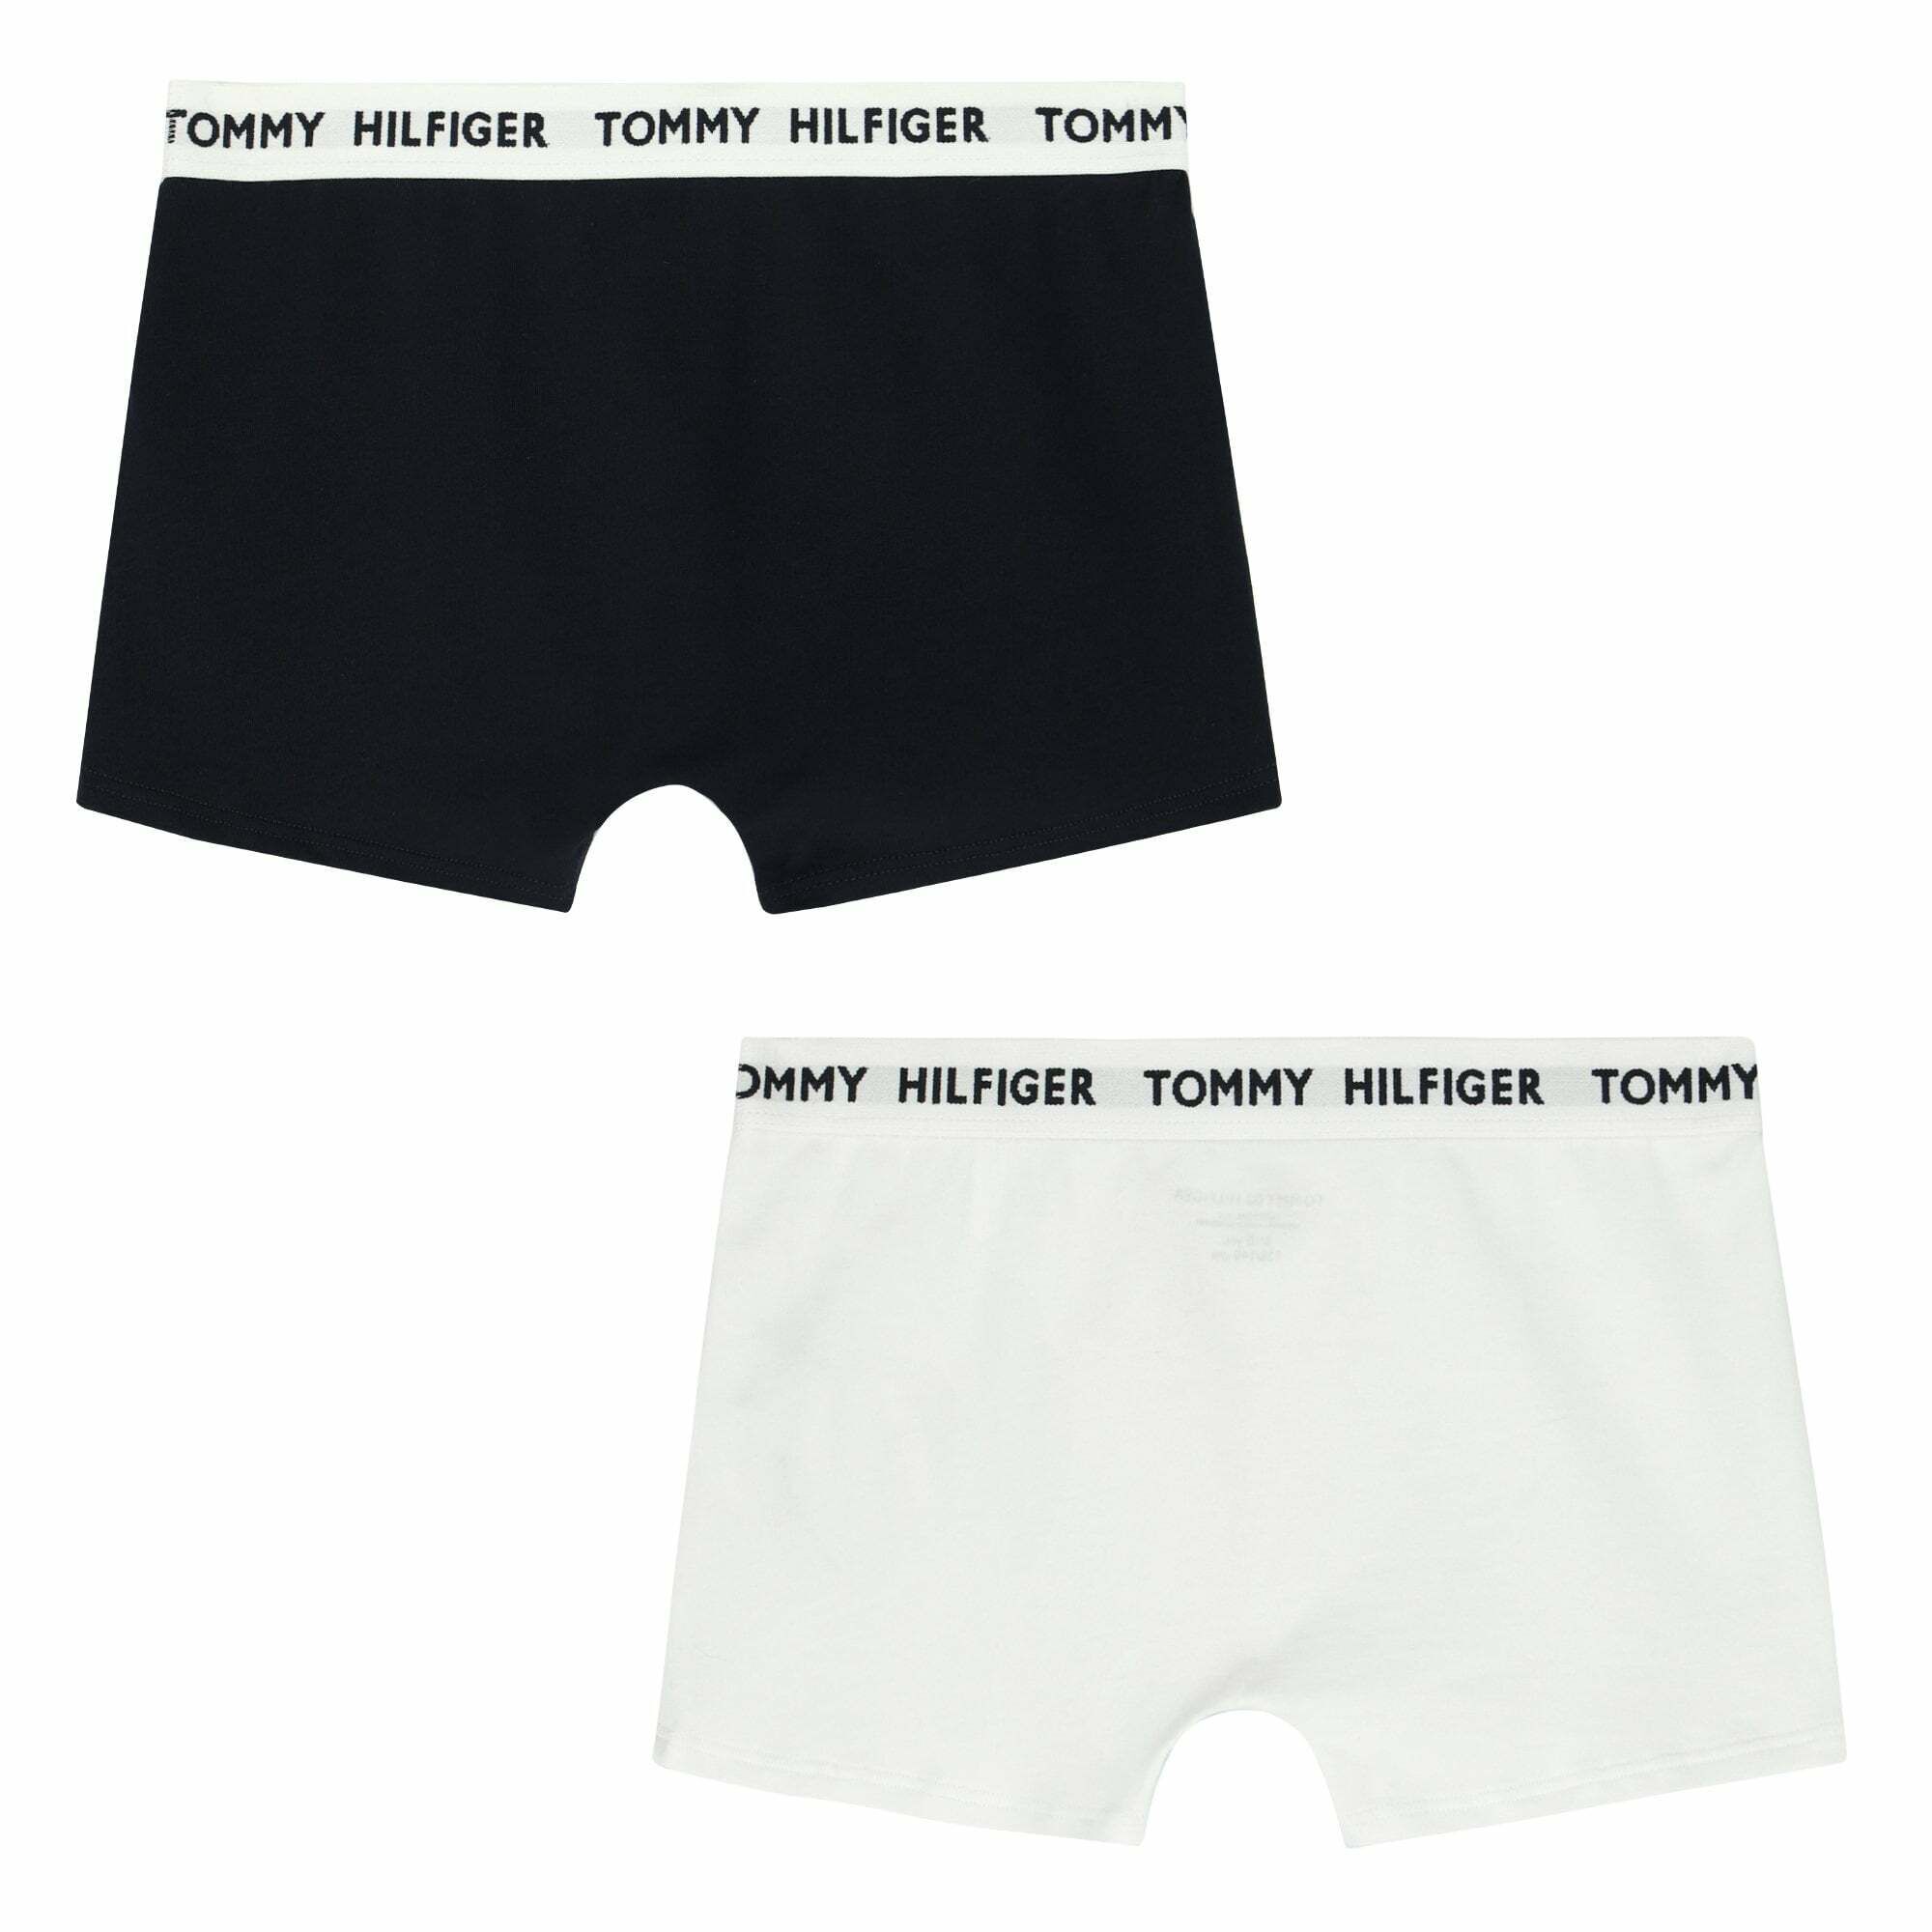 Tommy Hilfiger Twin Pack Boxer Trunks in Navy & White pants underwear boxers